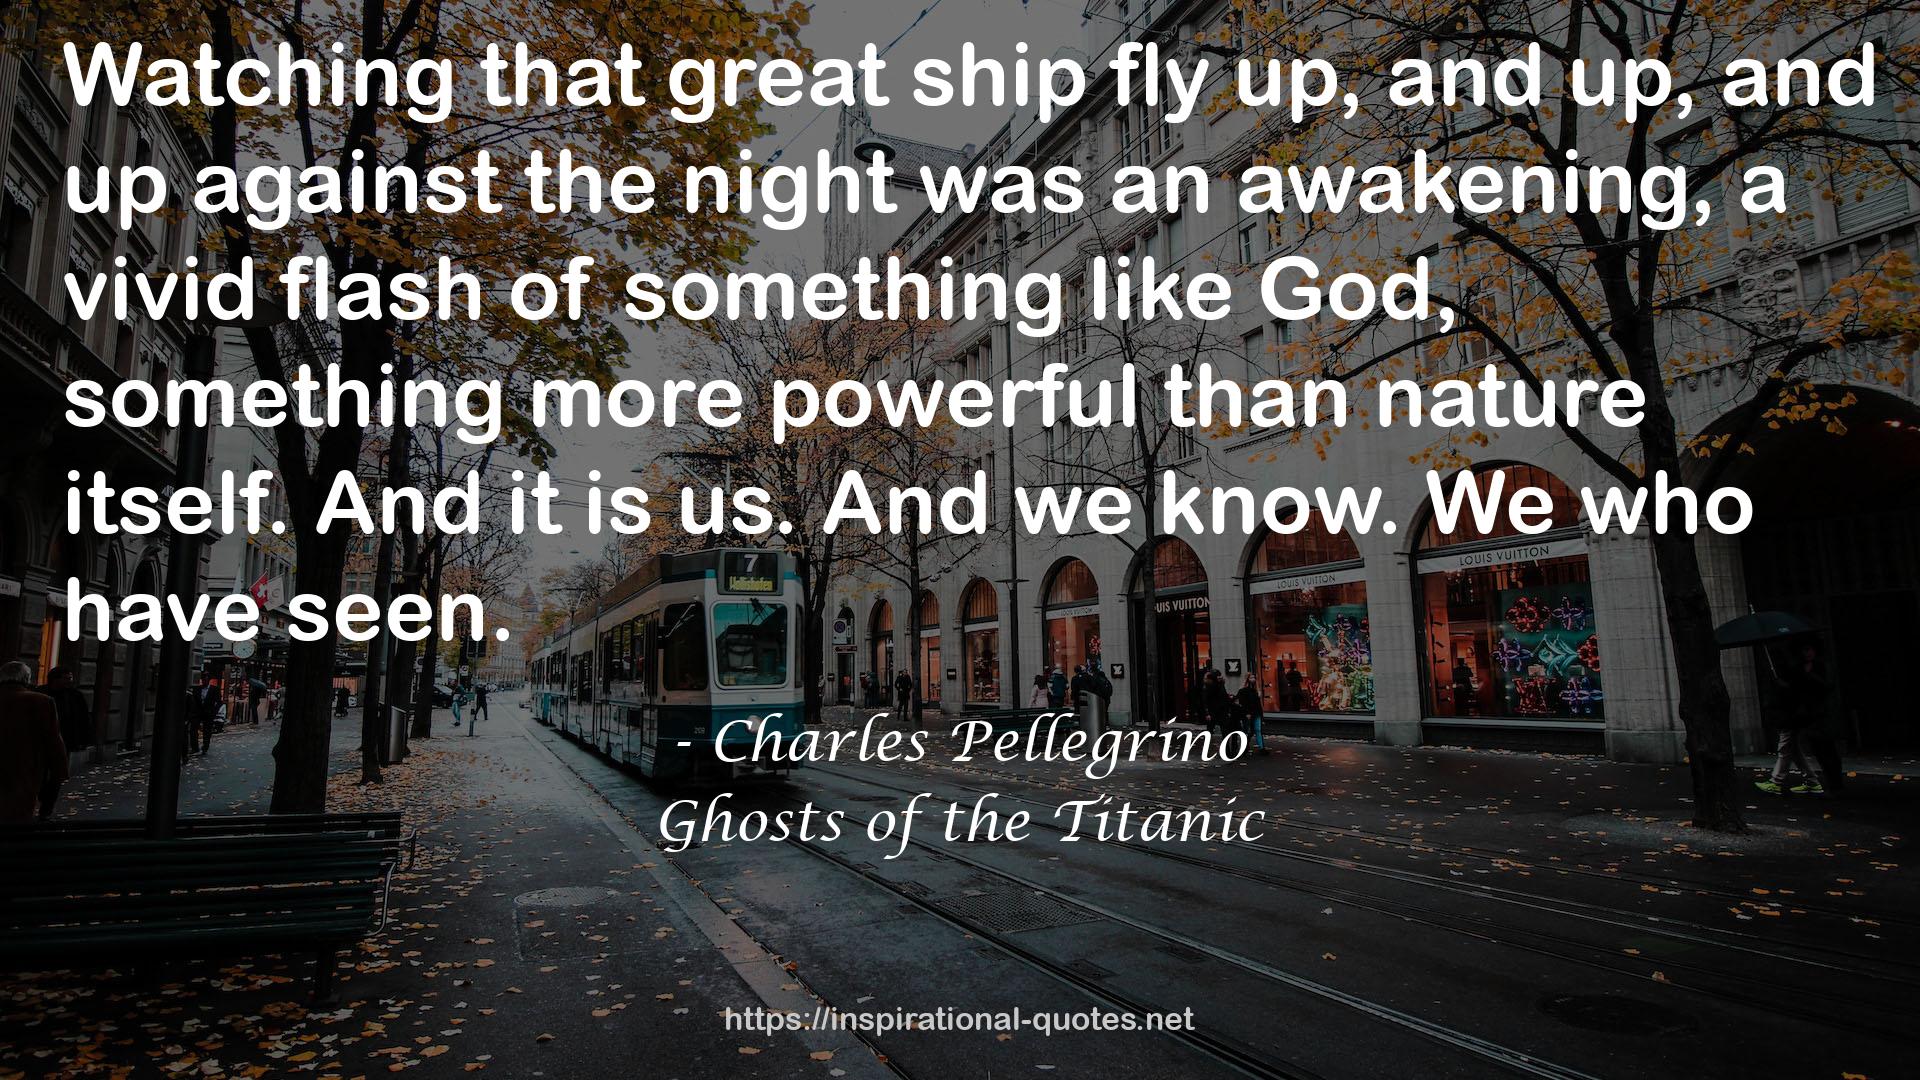 Ghosts of the Titanic QUOTES